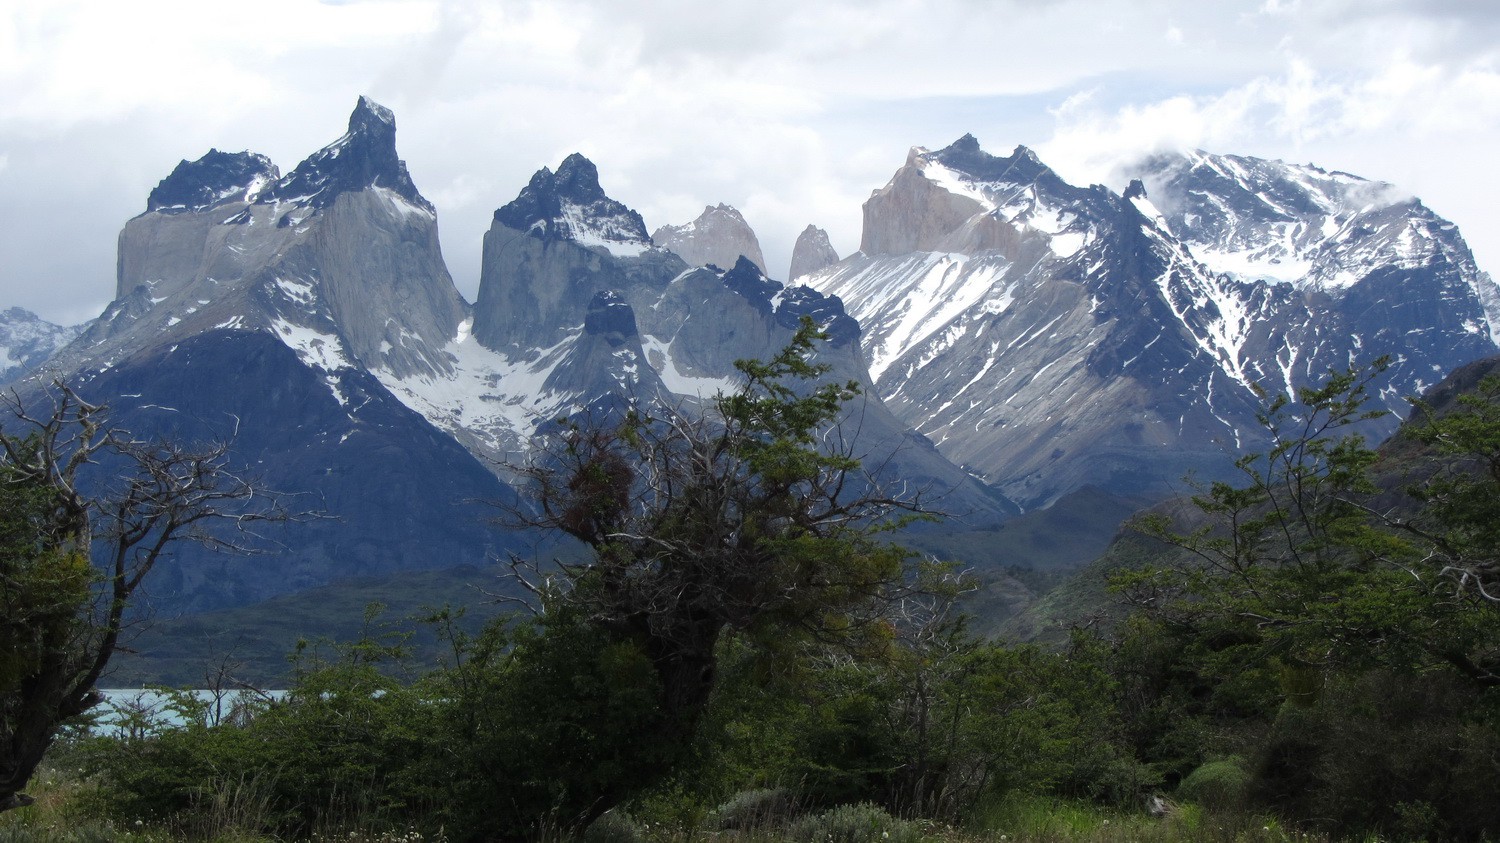 Cuernos seen from the campground Pehoe